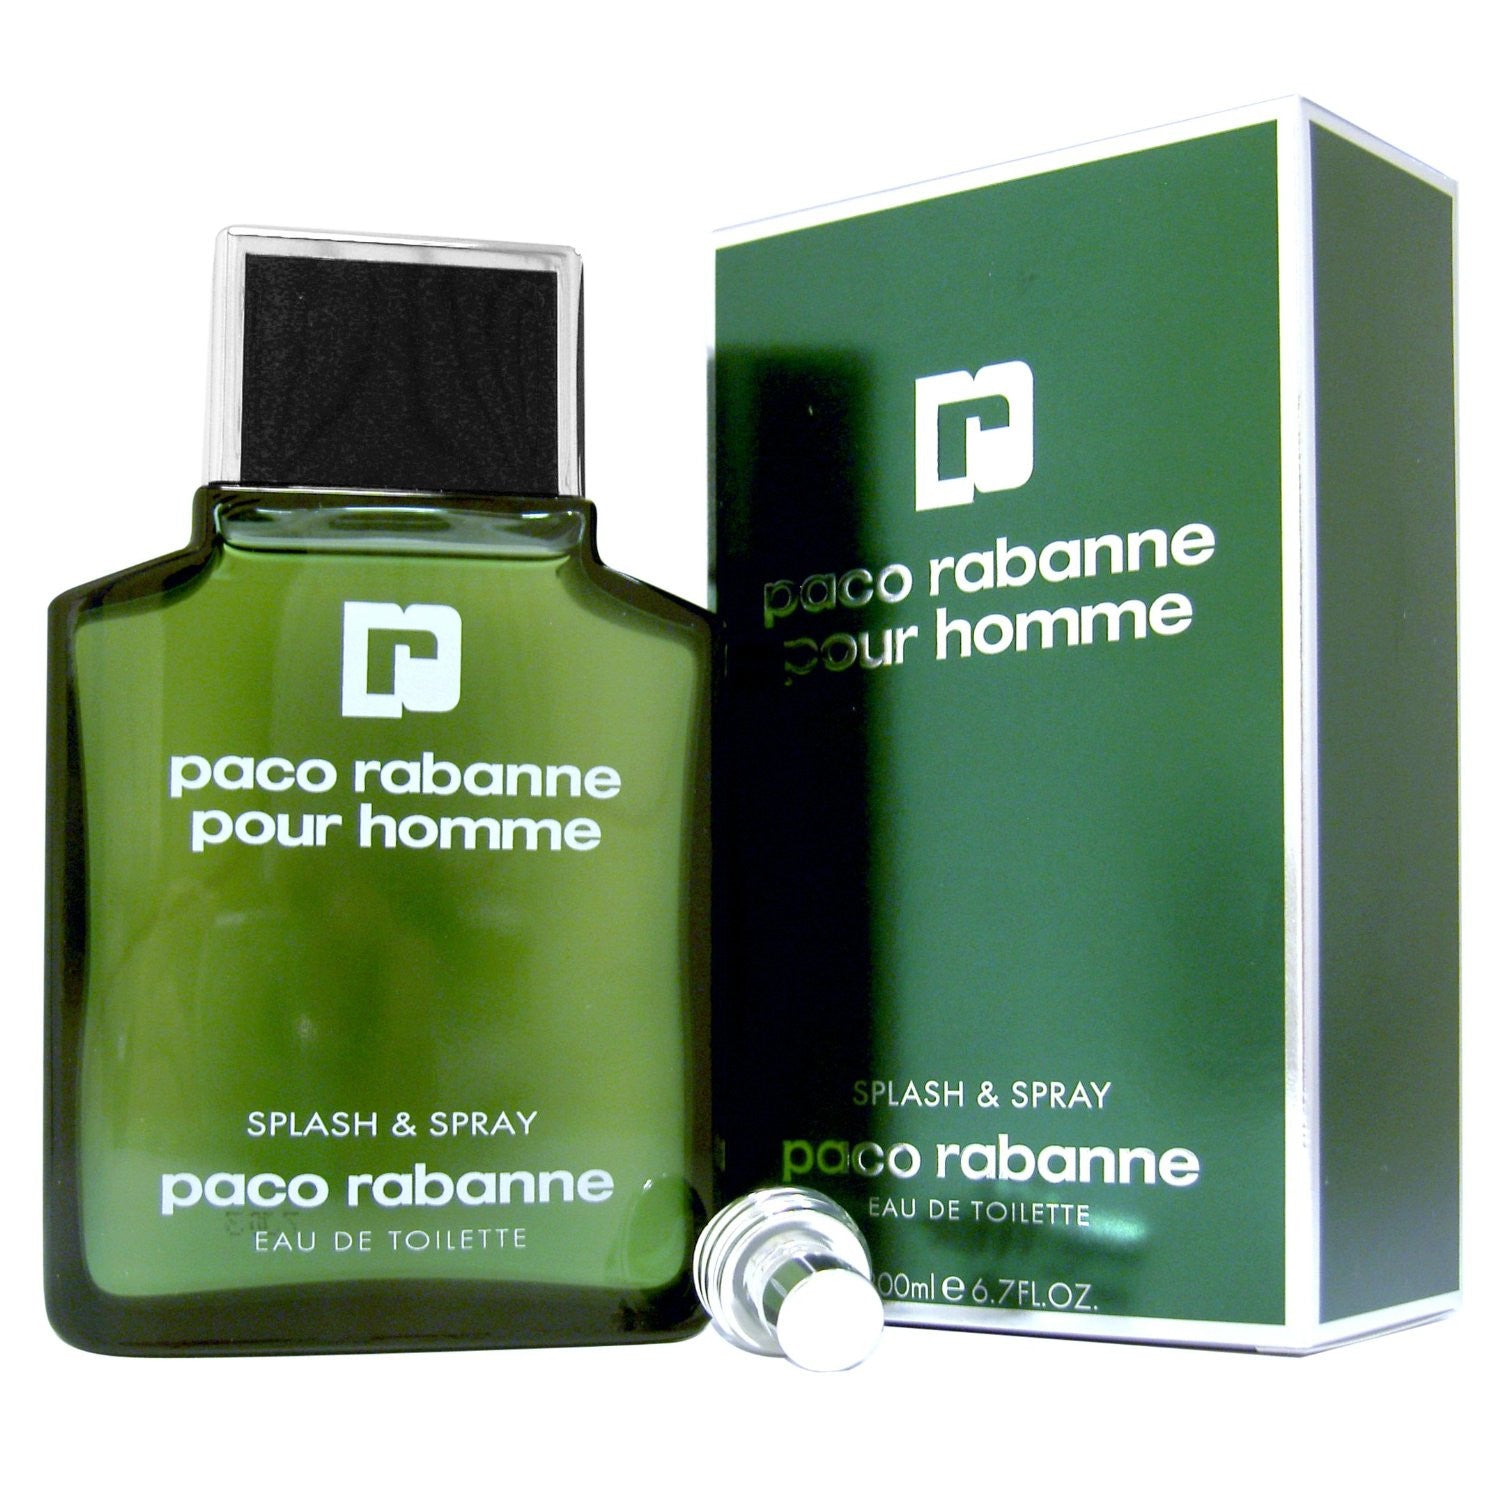 Paco pour homme. Paco Rabanne мужские pour Home. Пако Рабан мужские 200 мл. Paco Rabanne Paco Rabanne pour homme 200 мл. Мужские духи Пако Рабан зеленая.